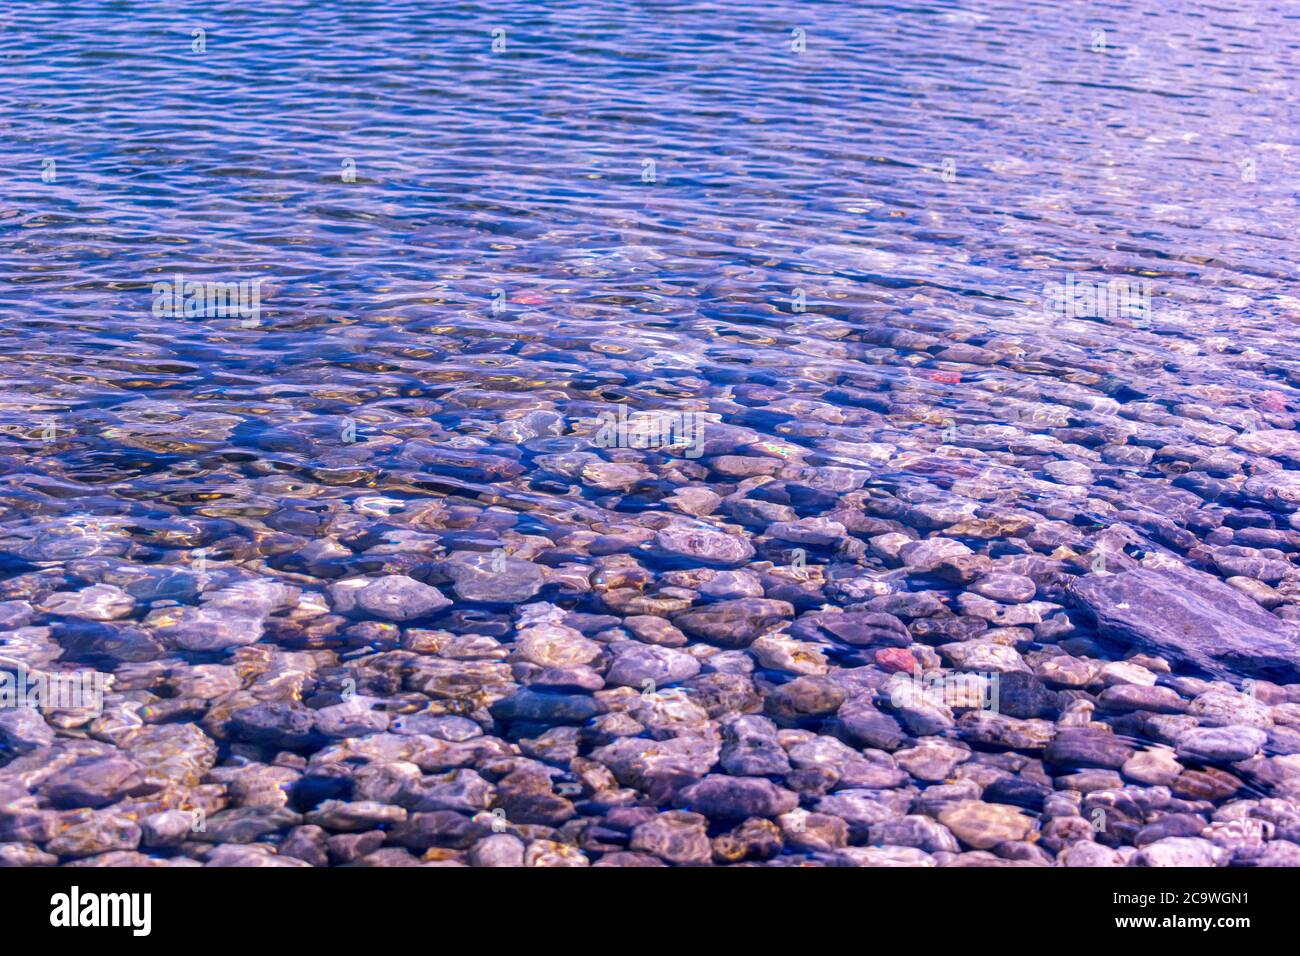 Top view of rocky riverbed under clear fresh water Stock Photo